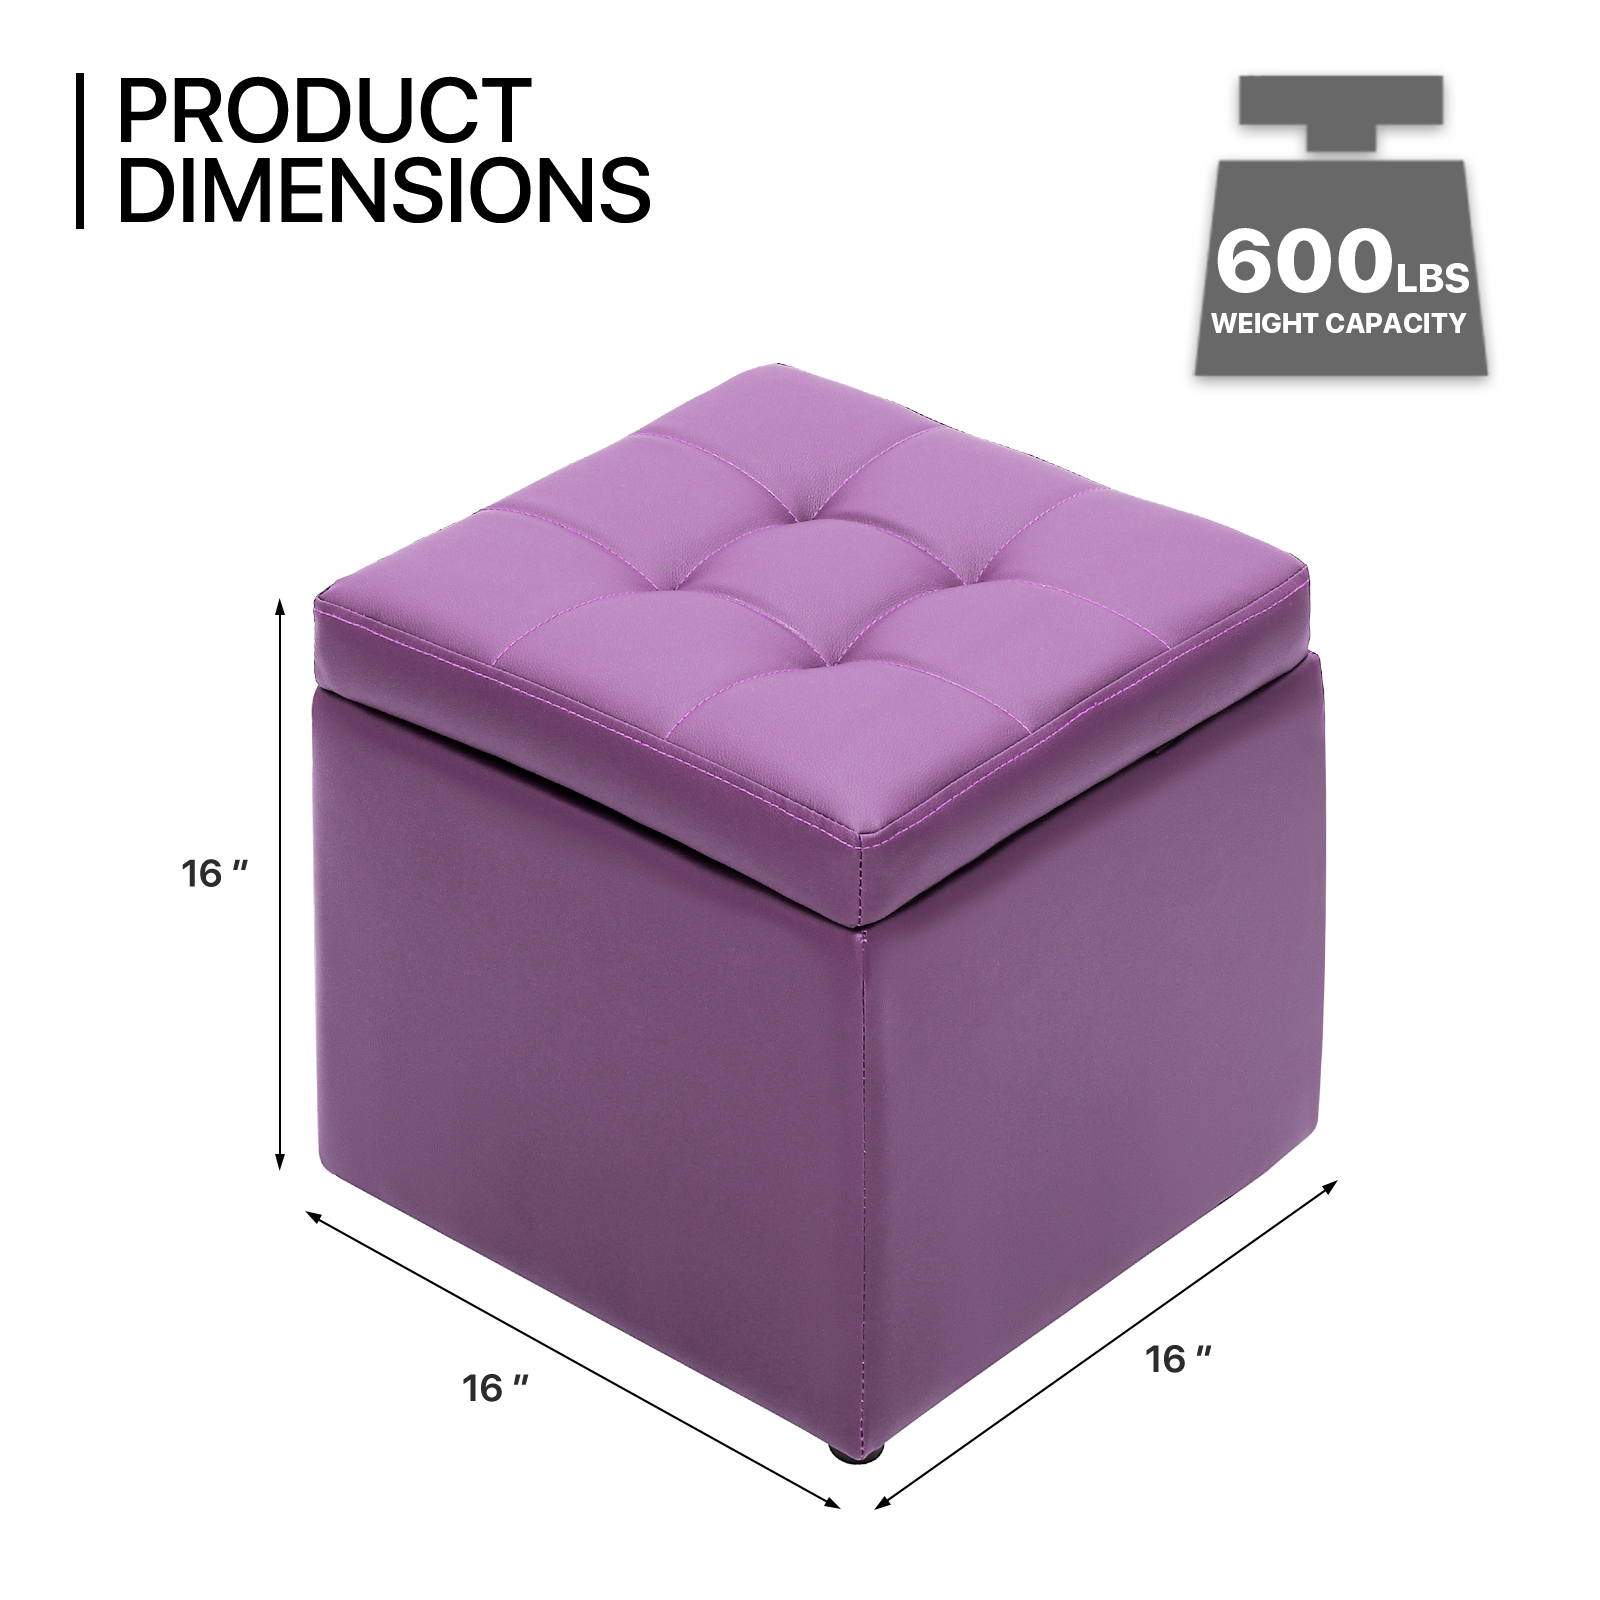 MoNiBloom 16" Square Button Tufted Storage Ottoman, PU Leather Entryway Shoe Bench, Livingroom Lift Top Pouffe Storage Cube Footstool, Purple - image 4 of 9